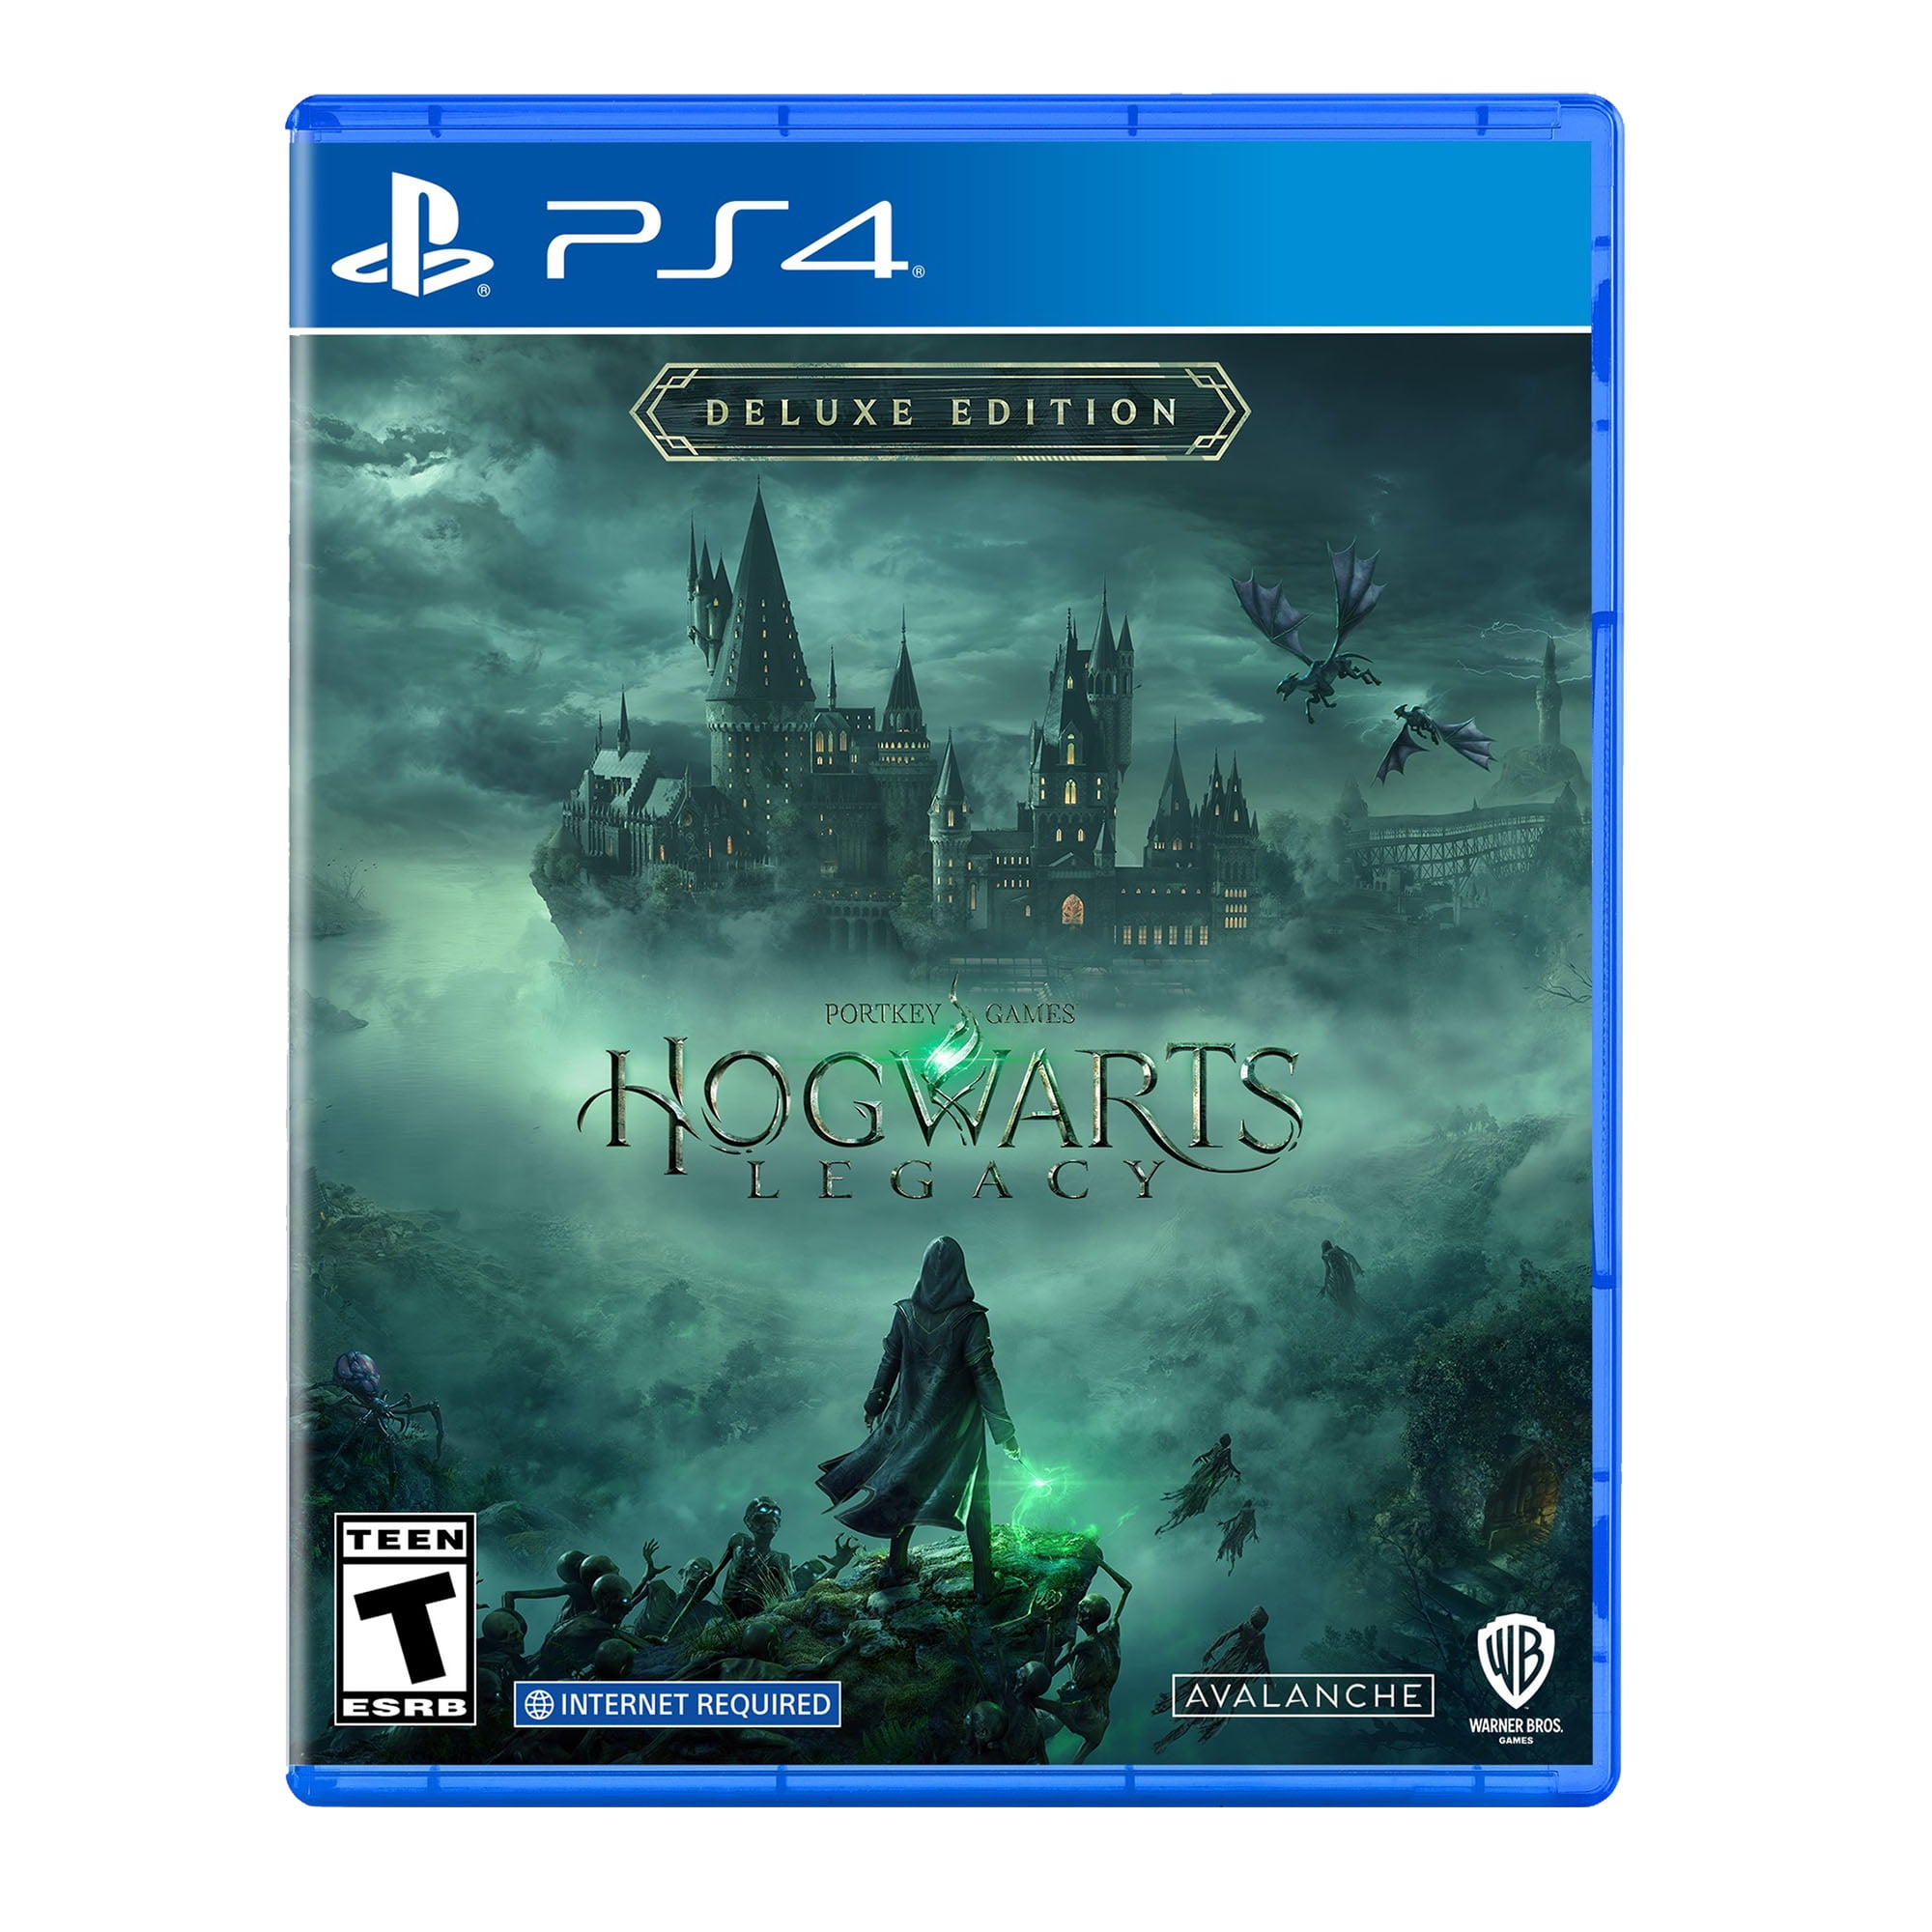 Hogwarts Legacy Standard Deluxe Edition PC GAME Steam